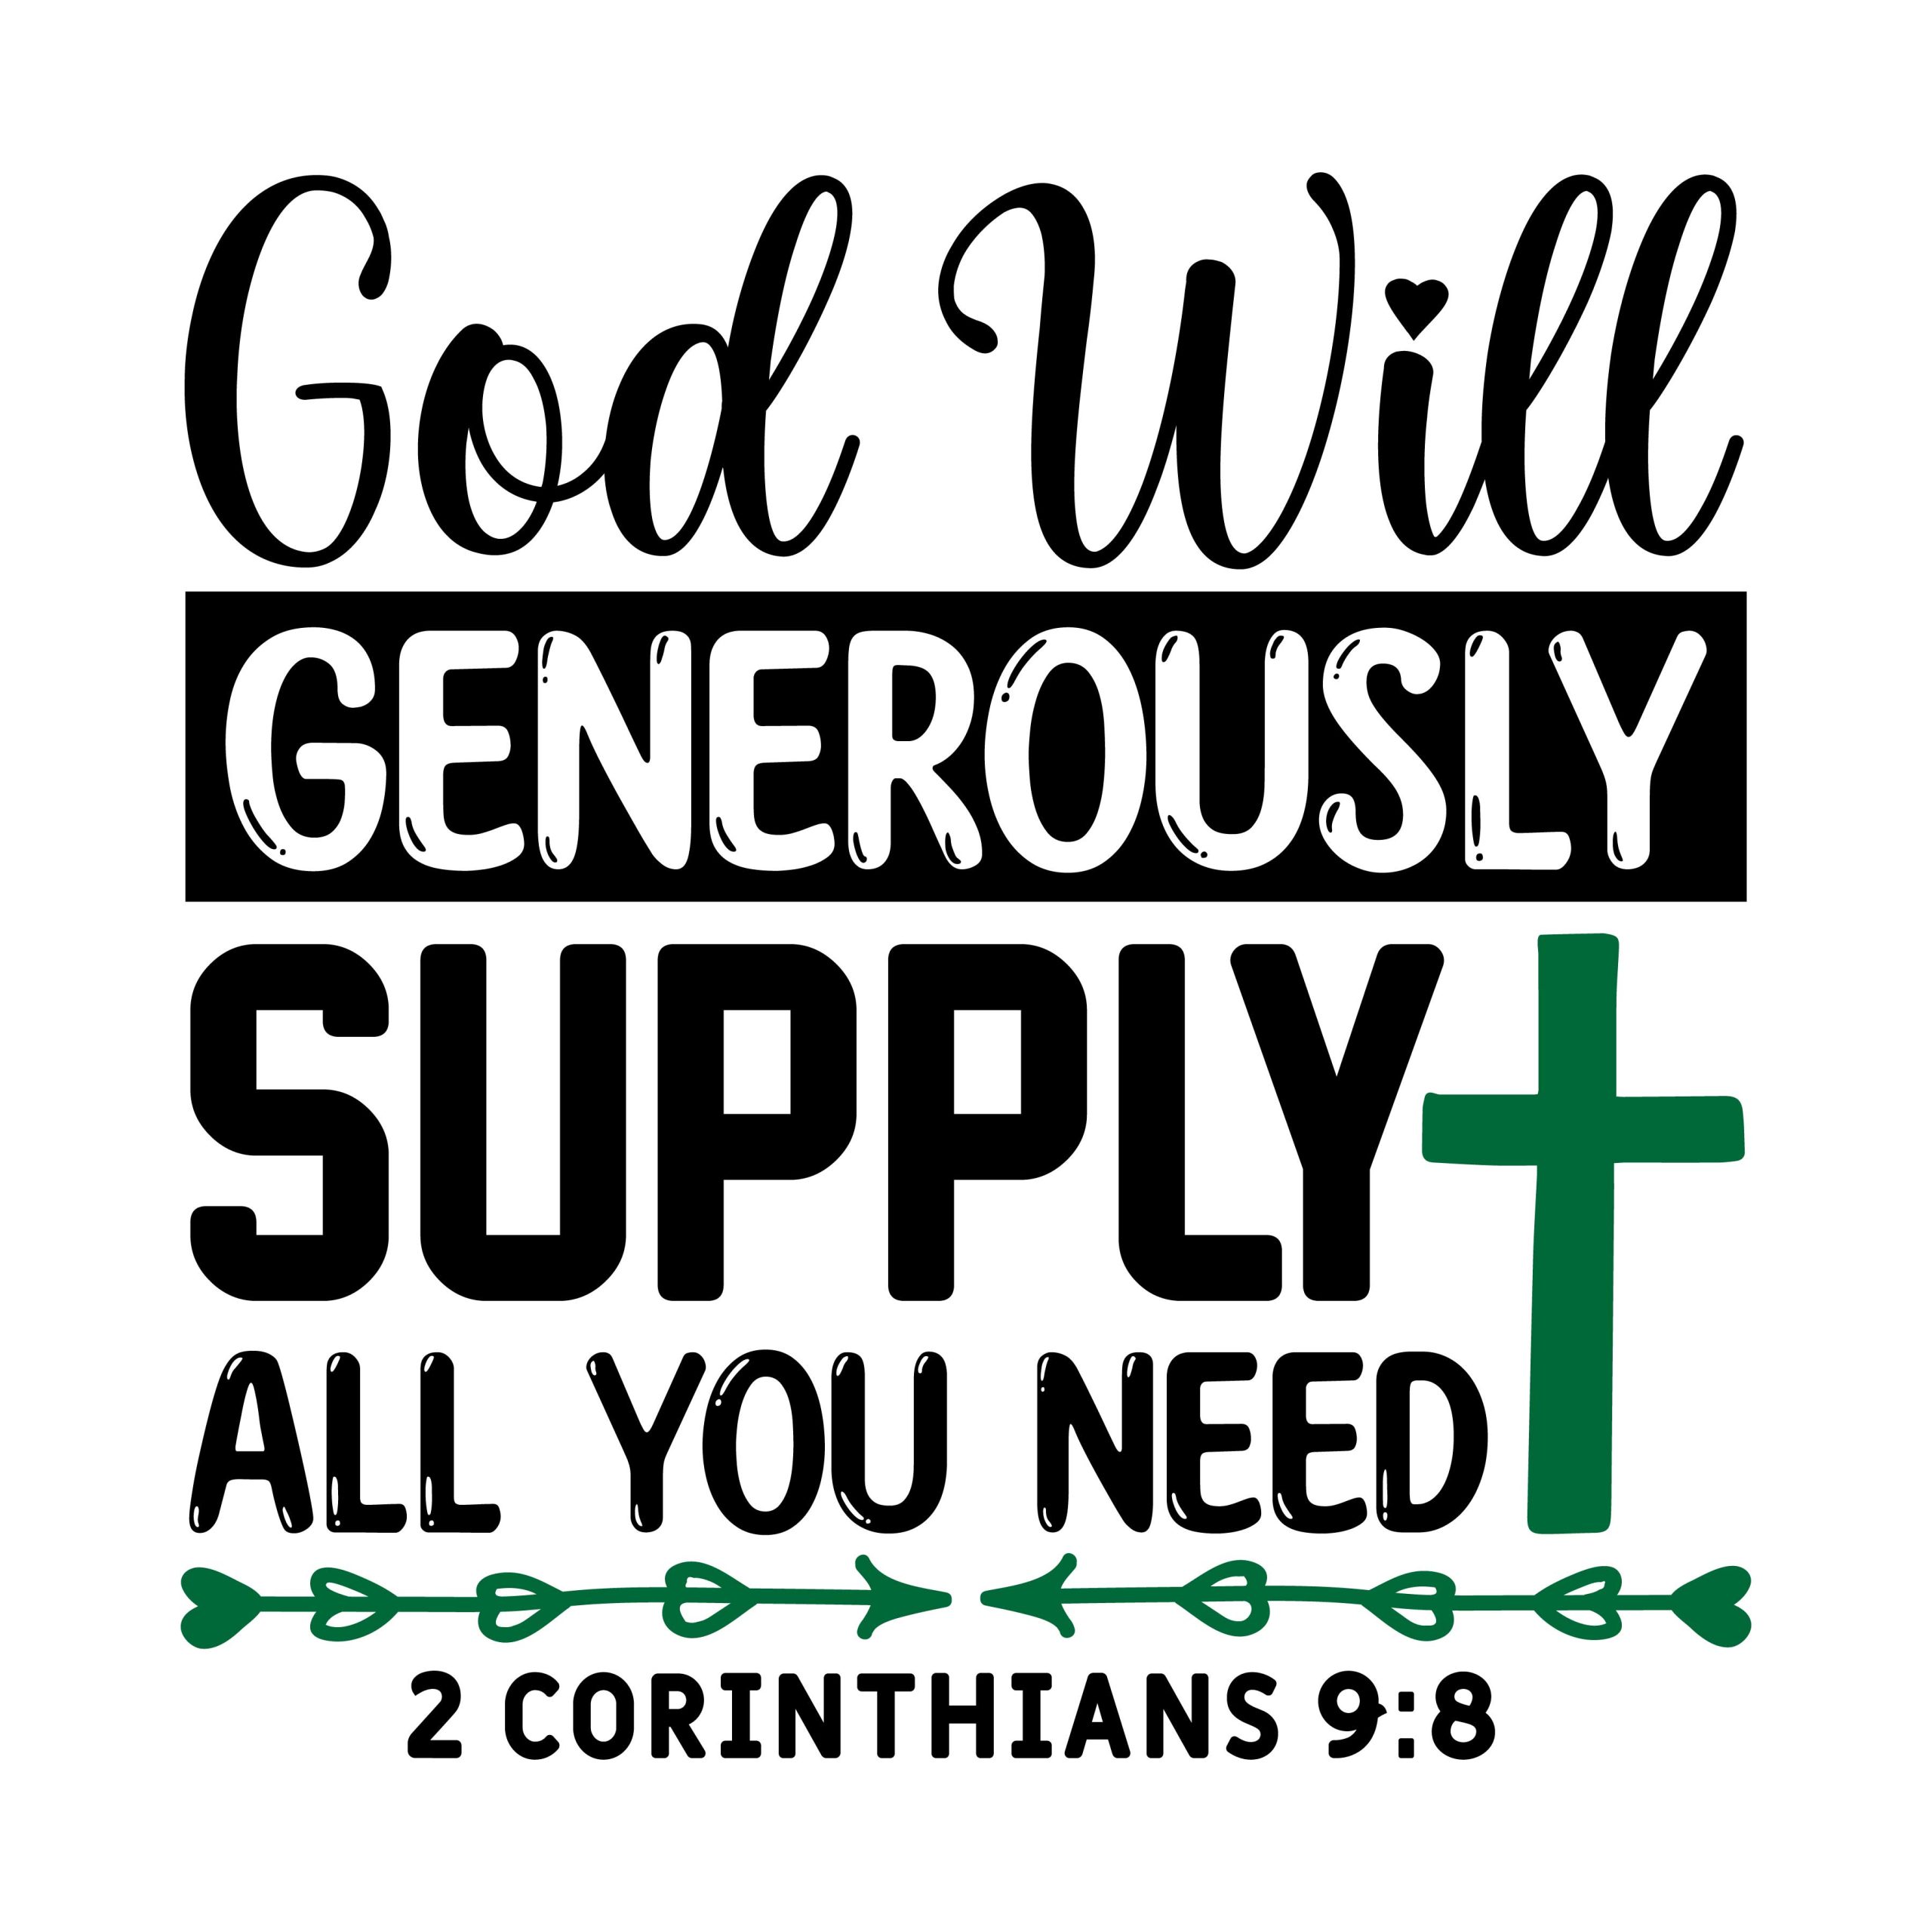 God will generously supply all you need 2 Corinthians 9:8, bible verses, scripture verses, svg files, passages, sayings, cricut designs, silhouette, embroidery, bundle, free cut files, design space, vector